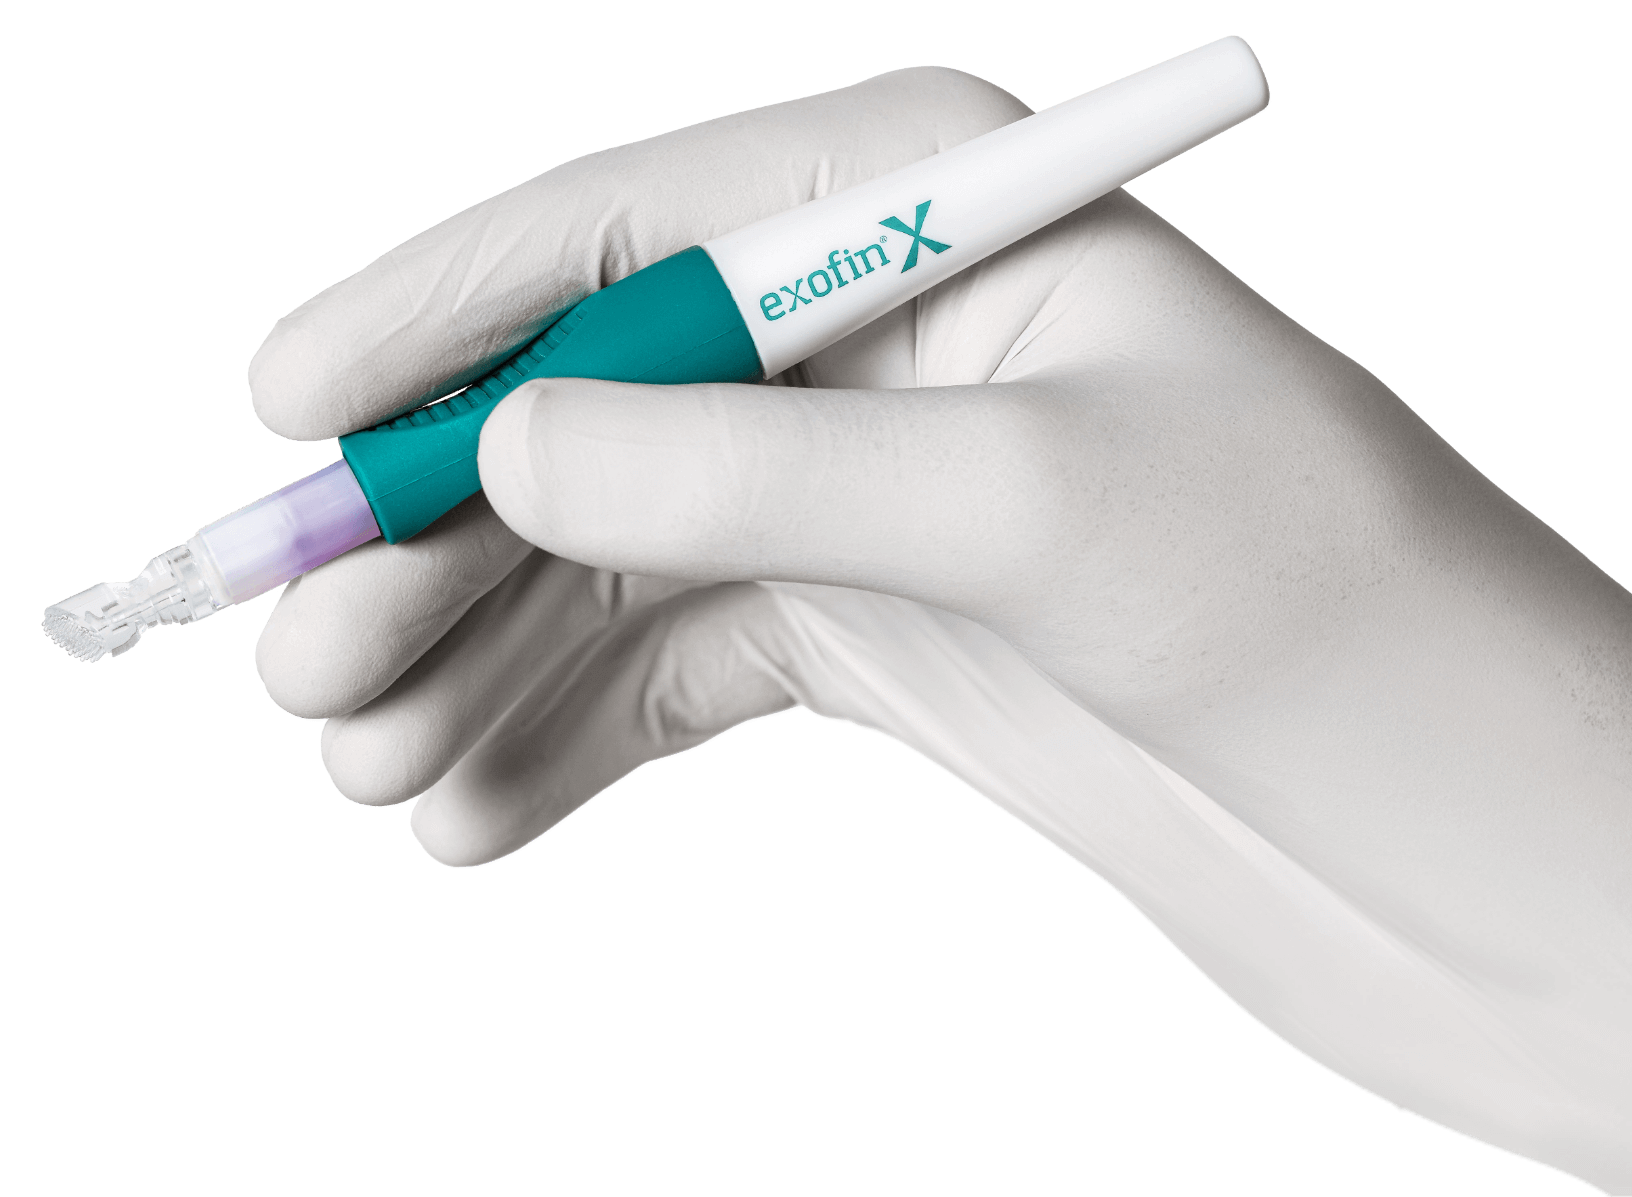 exofin precision pen applicator held by gloved hand